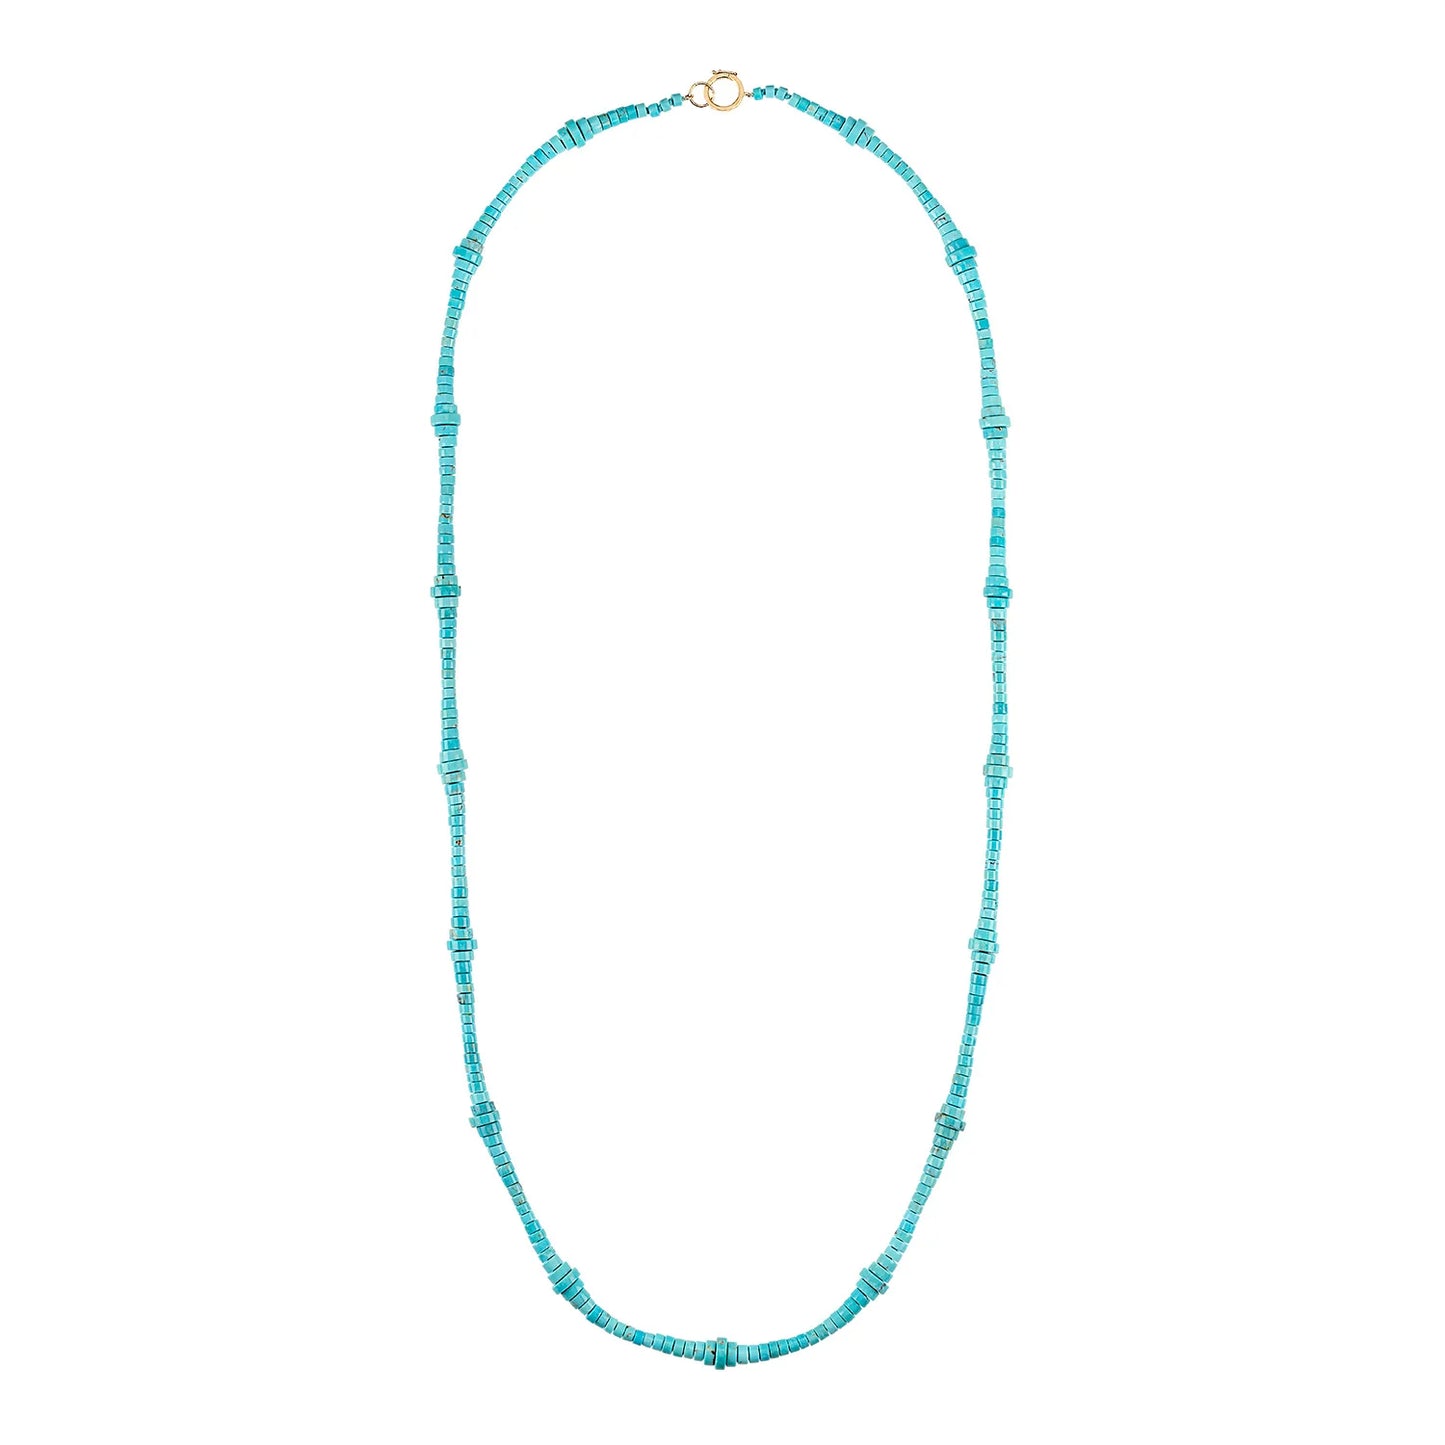 Devon Woodhill Turquoise Summer Beaded Necklace